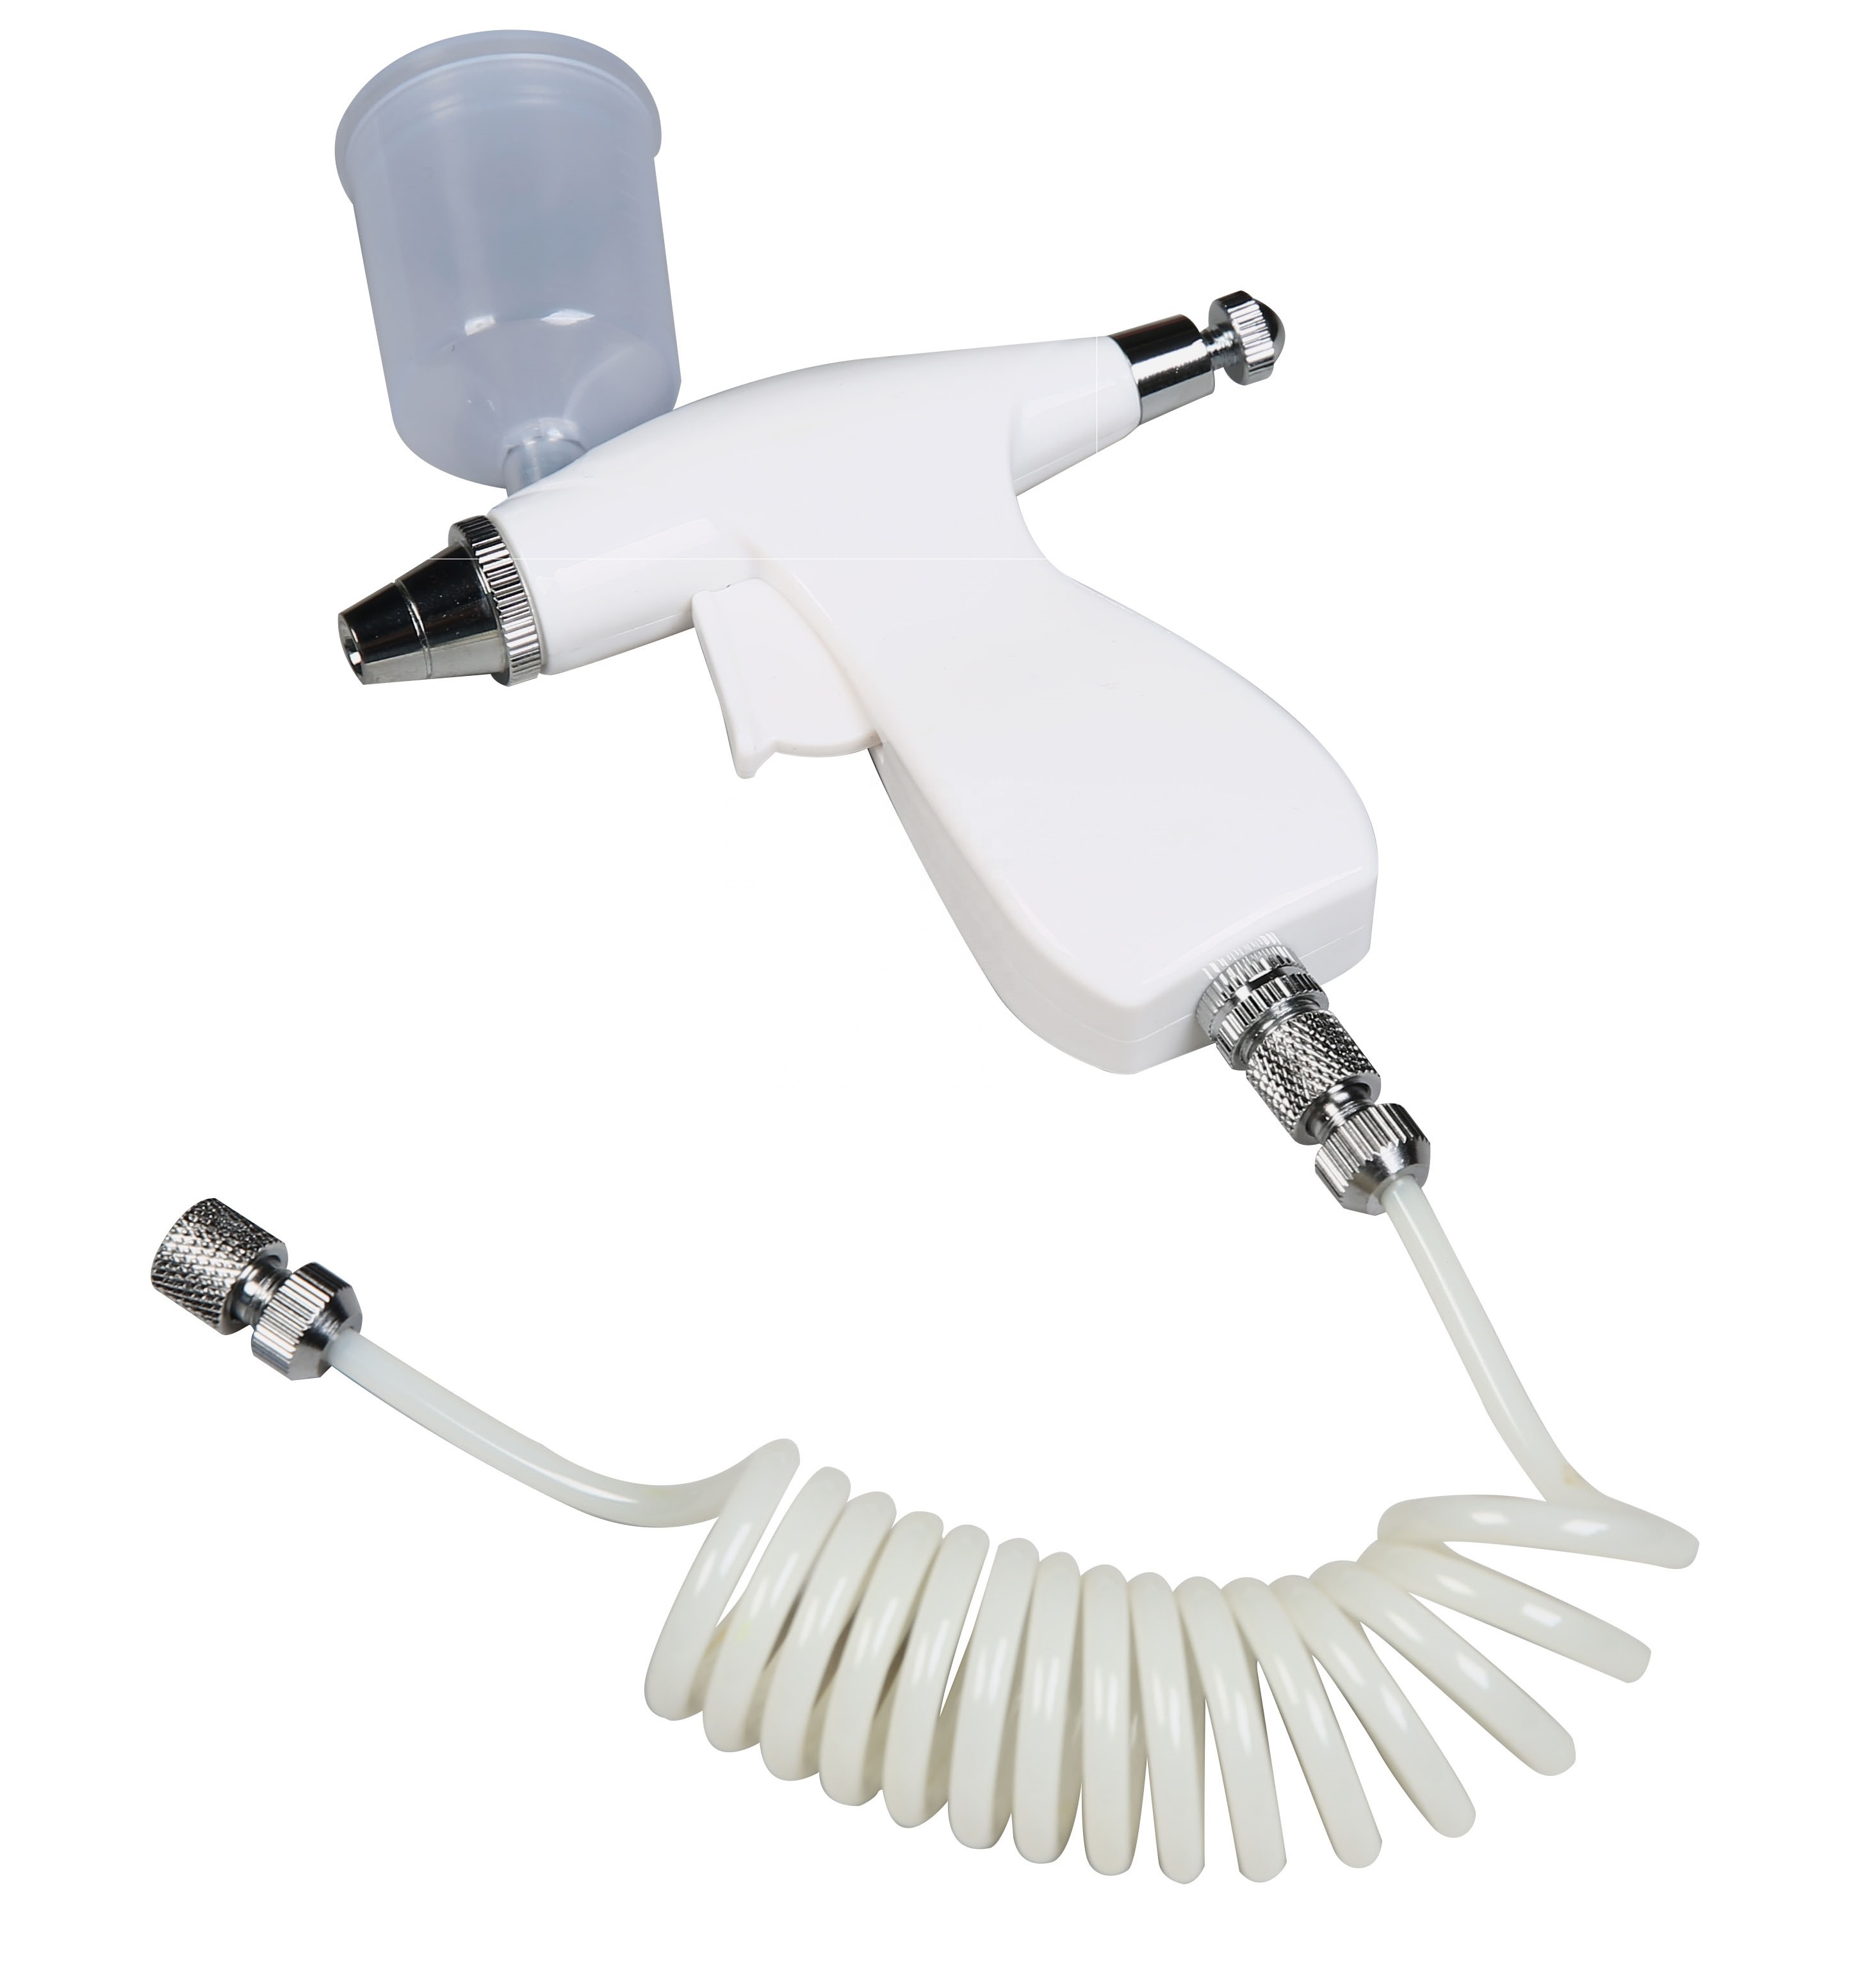 White color Small Airbrush Gun BT-105 Portable Air Brush Spraying Device Use For Cake Decorating